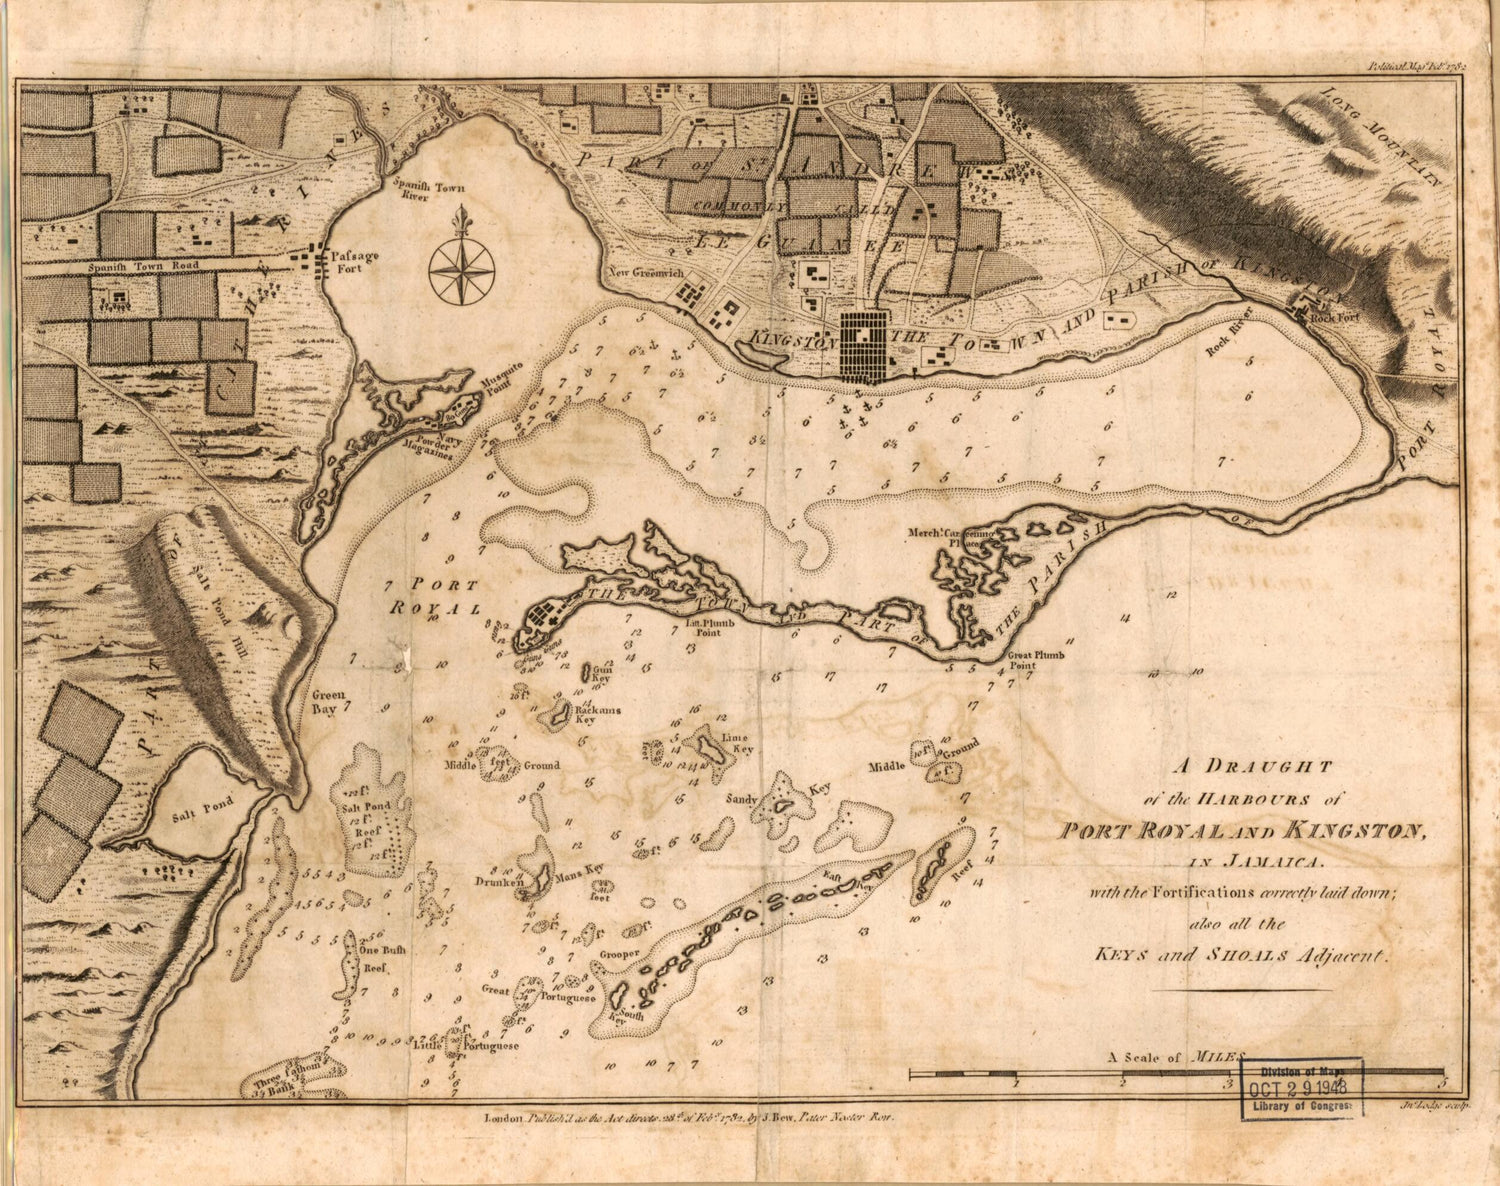 This old map of A Draught of the Harbours of Port Royal and Kingston In Jamaica With the Fortifications Correctly Laid Down, Also All the Keys and Shoals Adjacent from 1782 was created by John Lodge in 1782